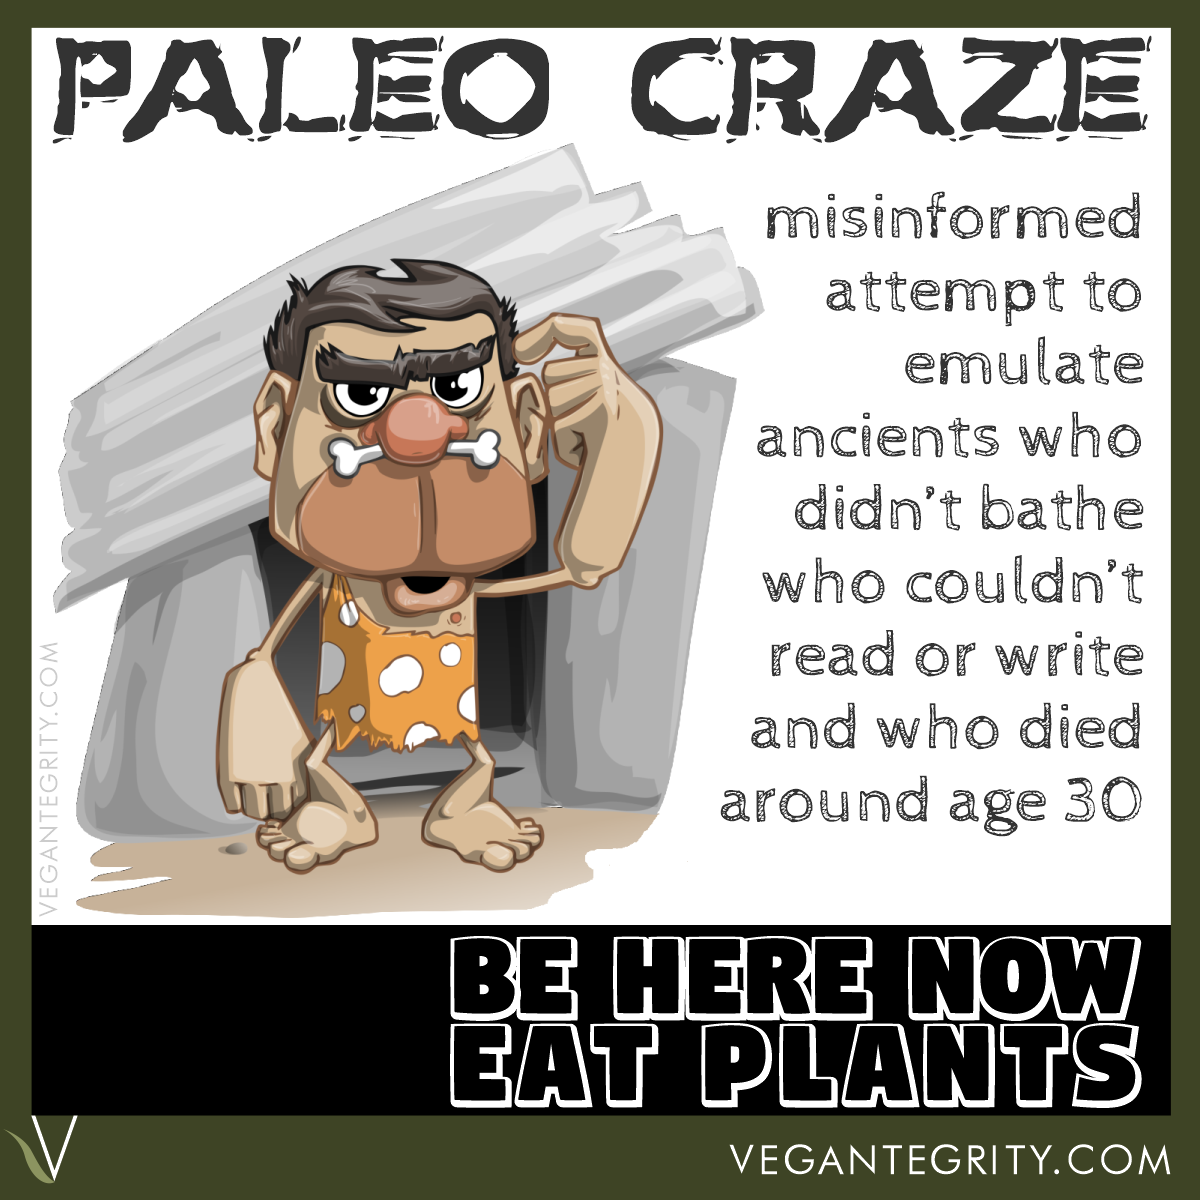 Paleo Craze - misinformed attempt to emulate ancients who didn't bathe, who couldn't read or write and who died around age 30 - caveman cartoon scratching his heat - Be here now. Eat plants in white letters on black background